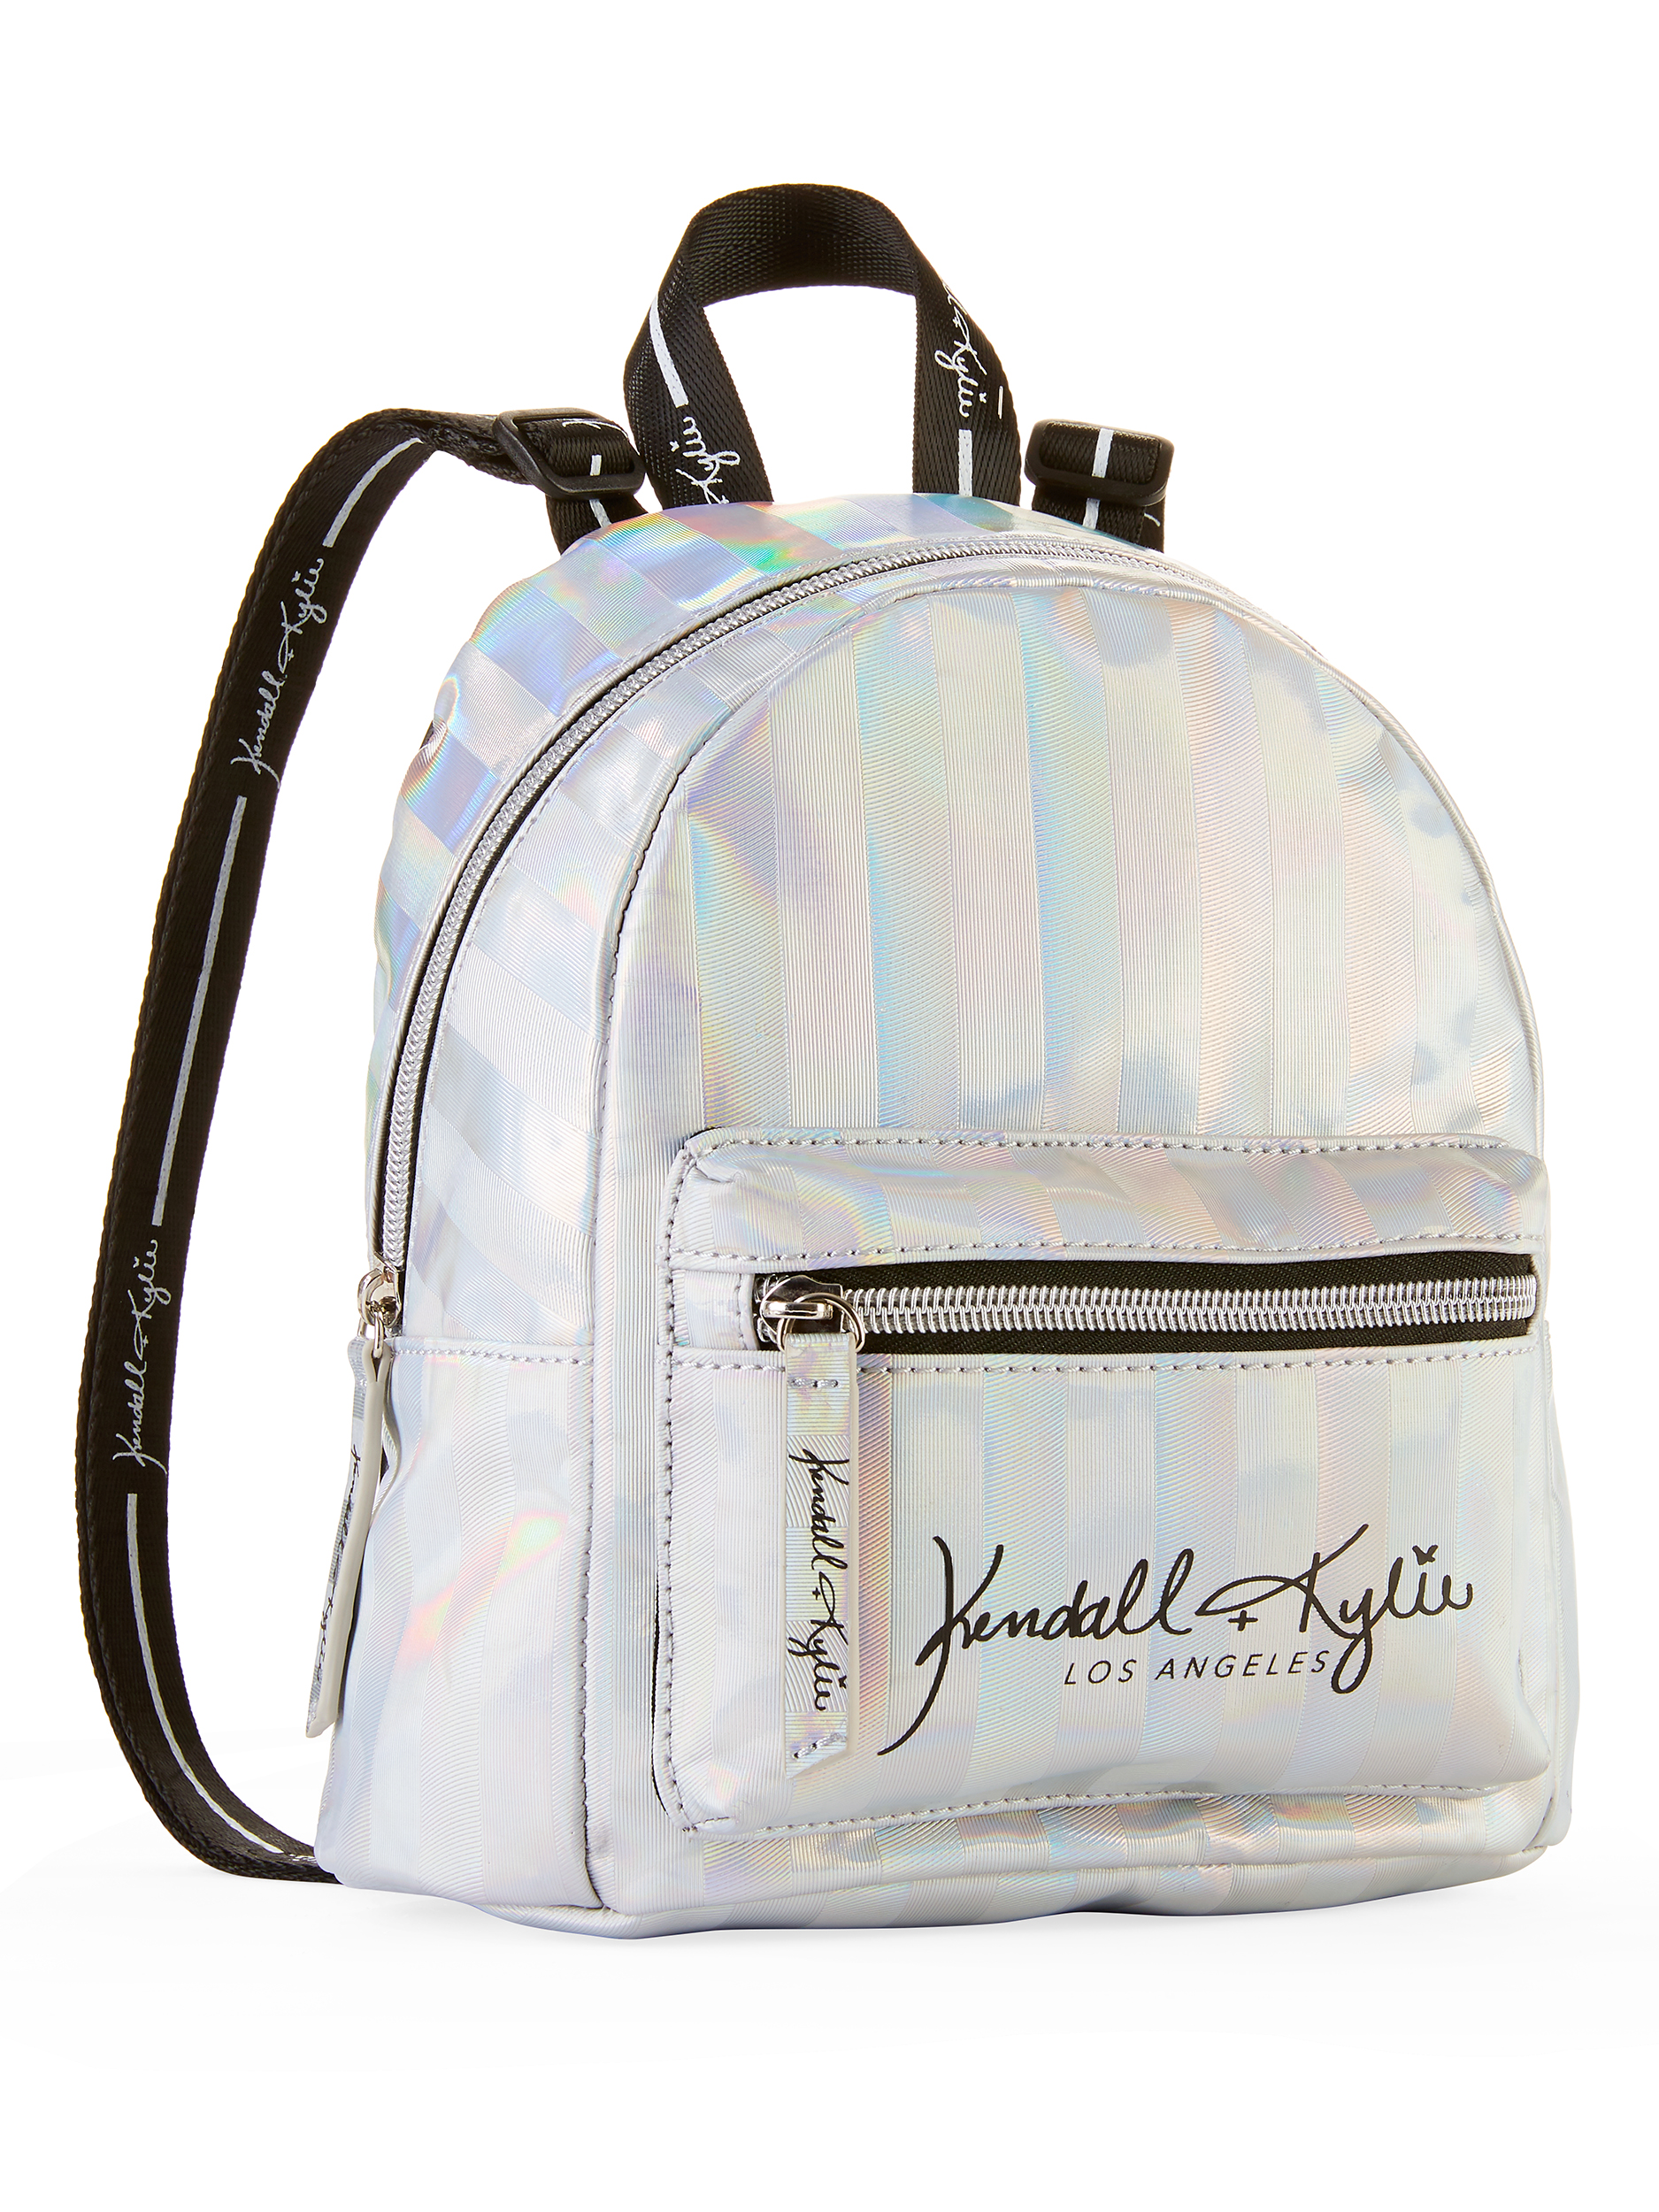 Kendall + Kylie for Walmart Iridescent Mini Backpack - image 4 of 5